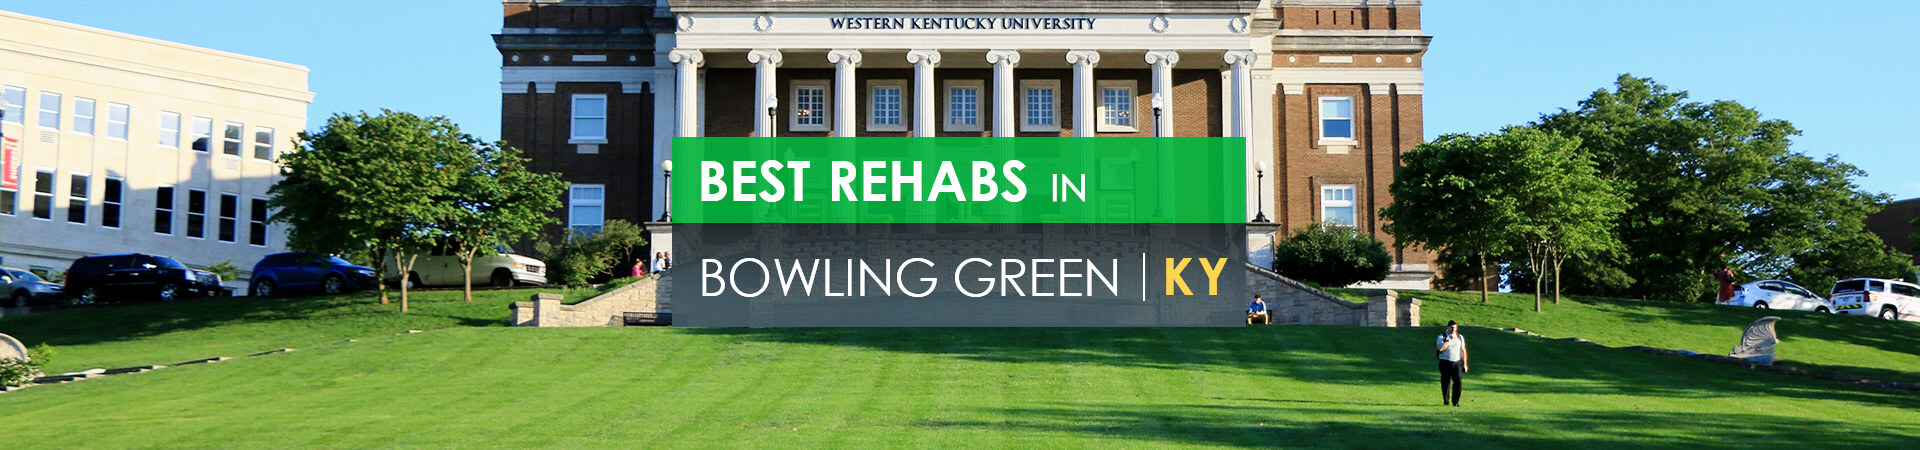 Best rehabs in Bowling Green, KY